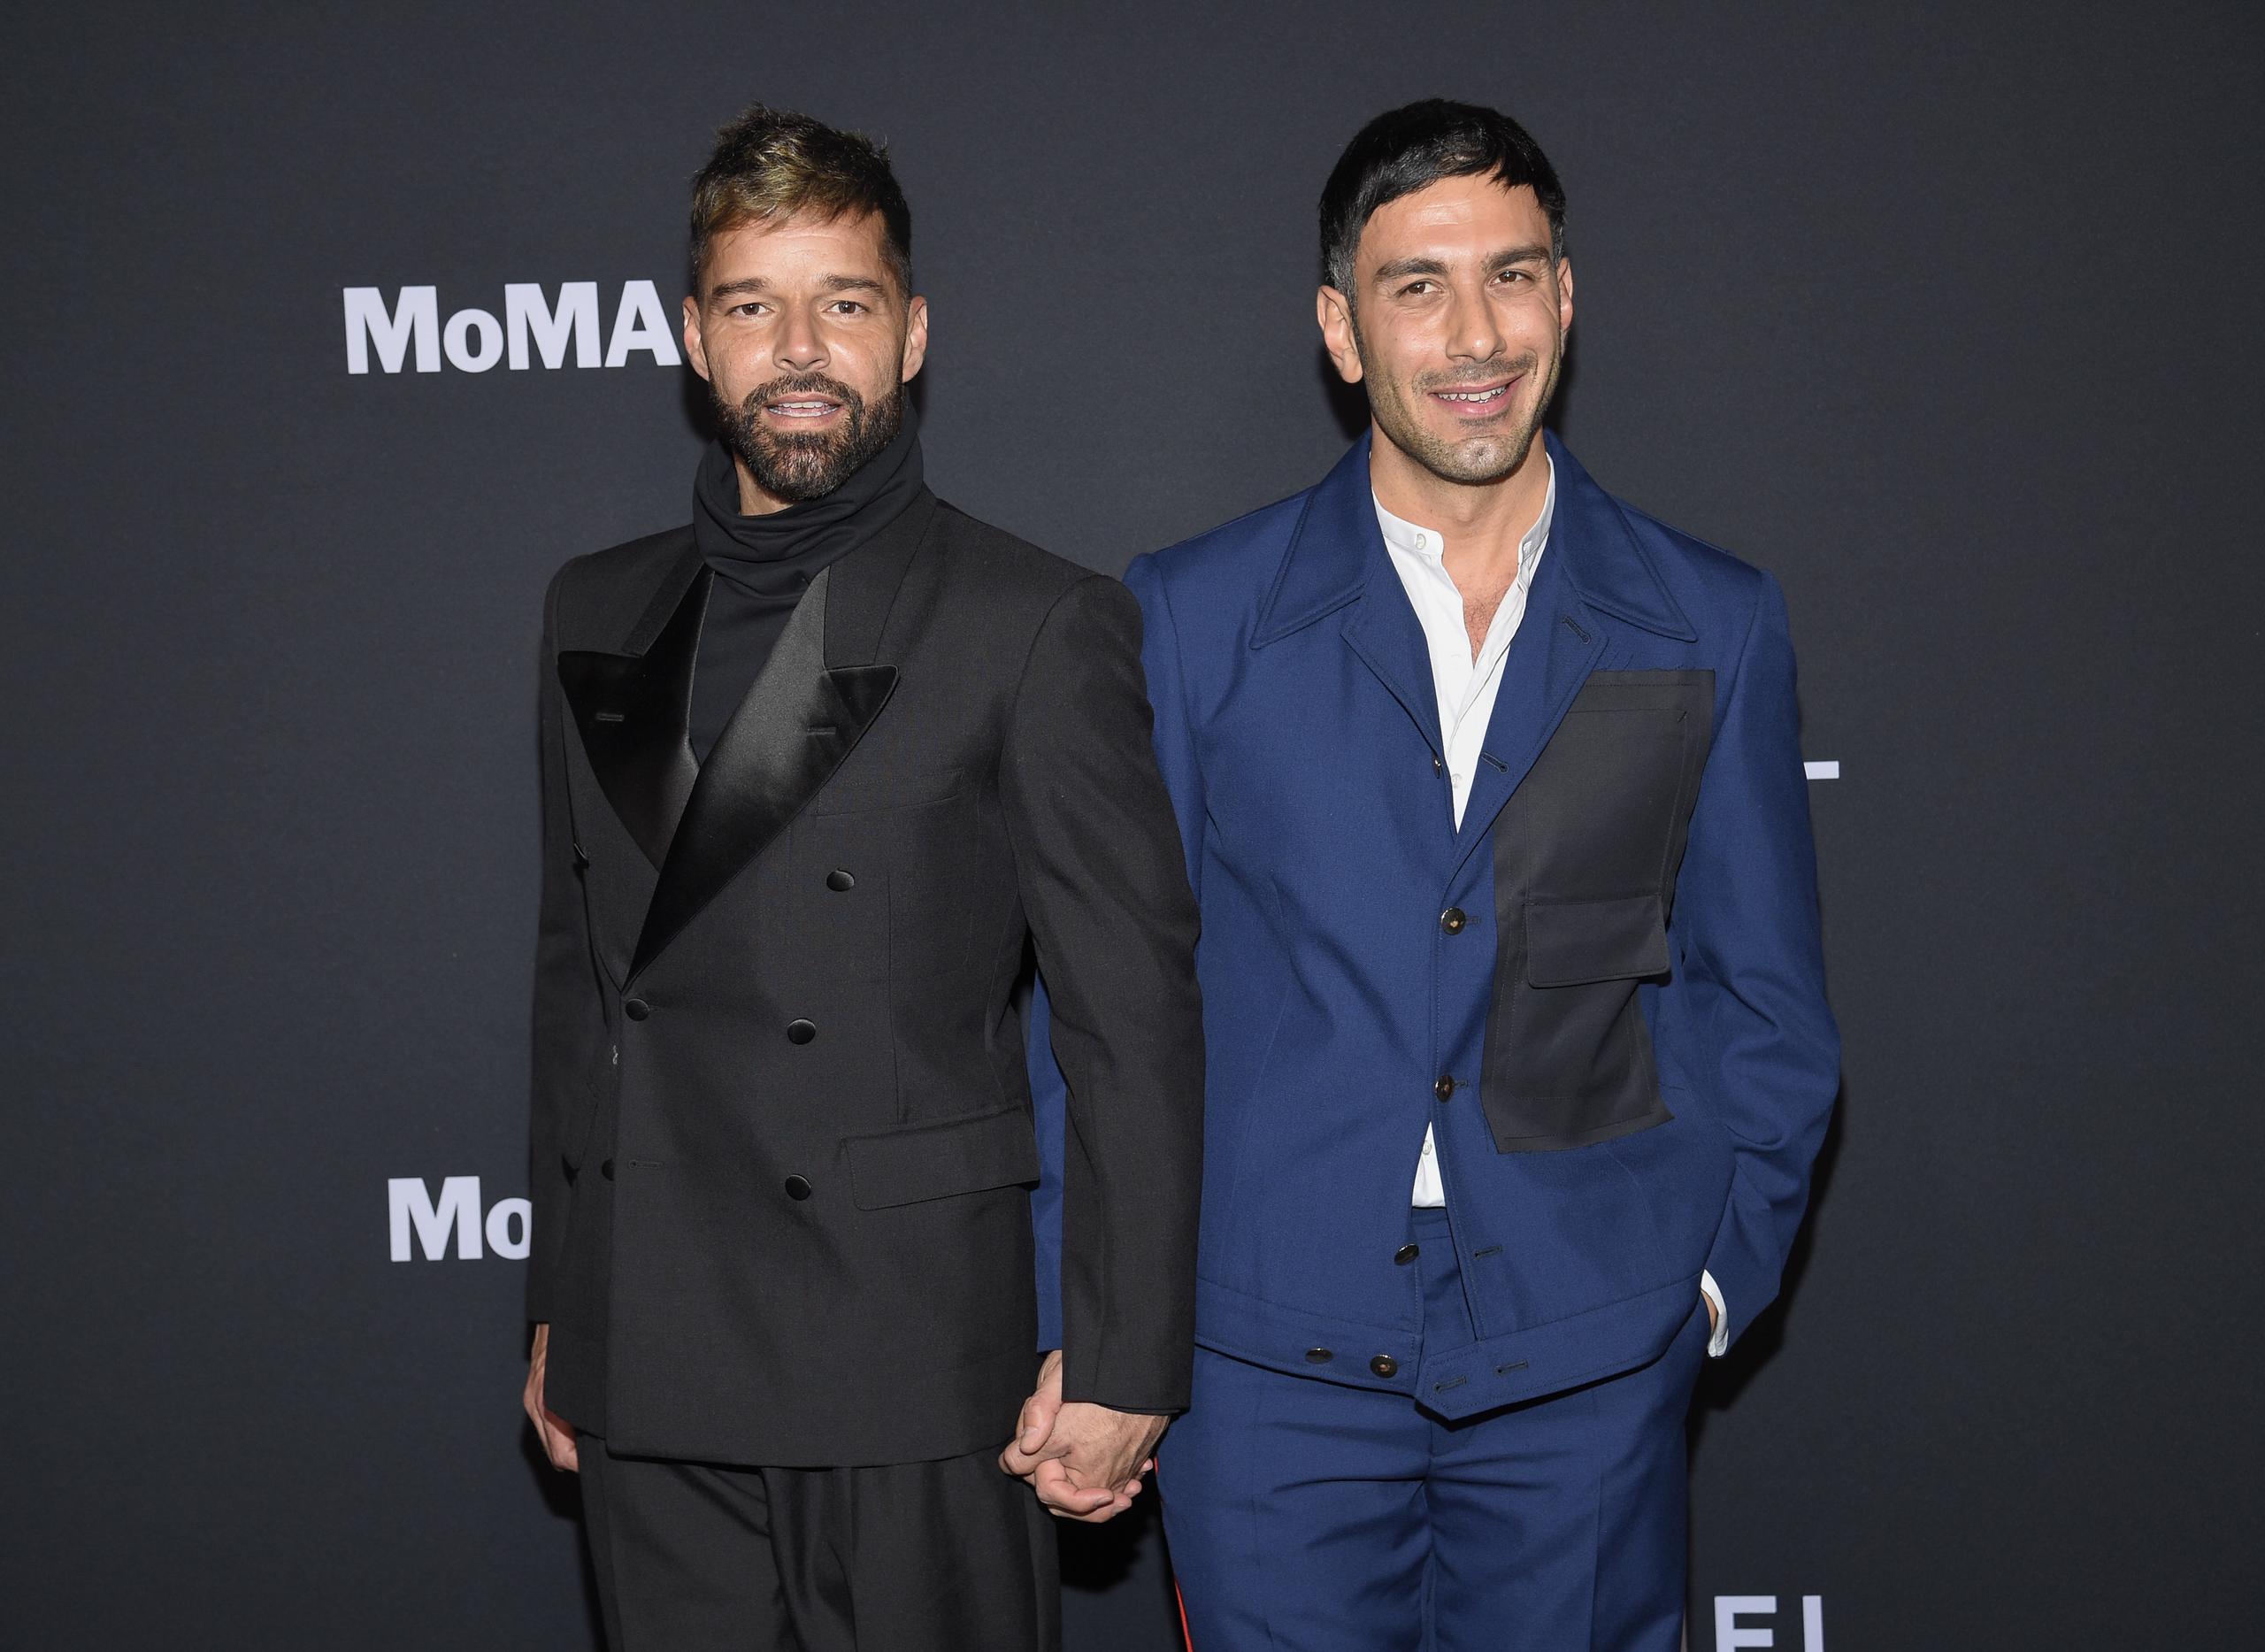 Ricky Martin, left, and husband Jwan Yosef attend the MoMA Film Benefit presented by CHANEL honoring Penelope Cruz at the Museum of Modern Art on Tuesday, Dec. 14, 2021, in New York. (Photo by Evan Agostini/Invision/AP)